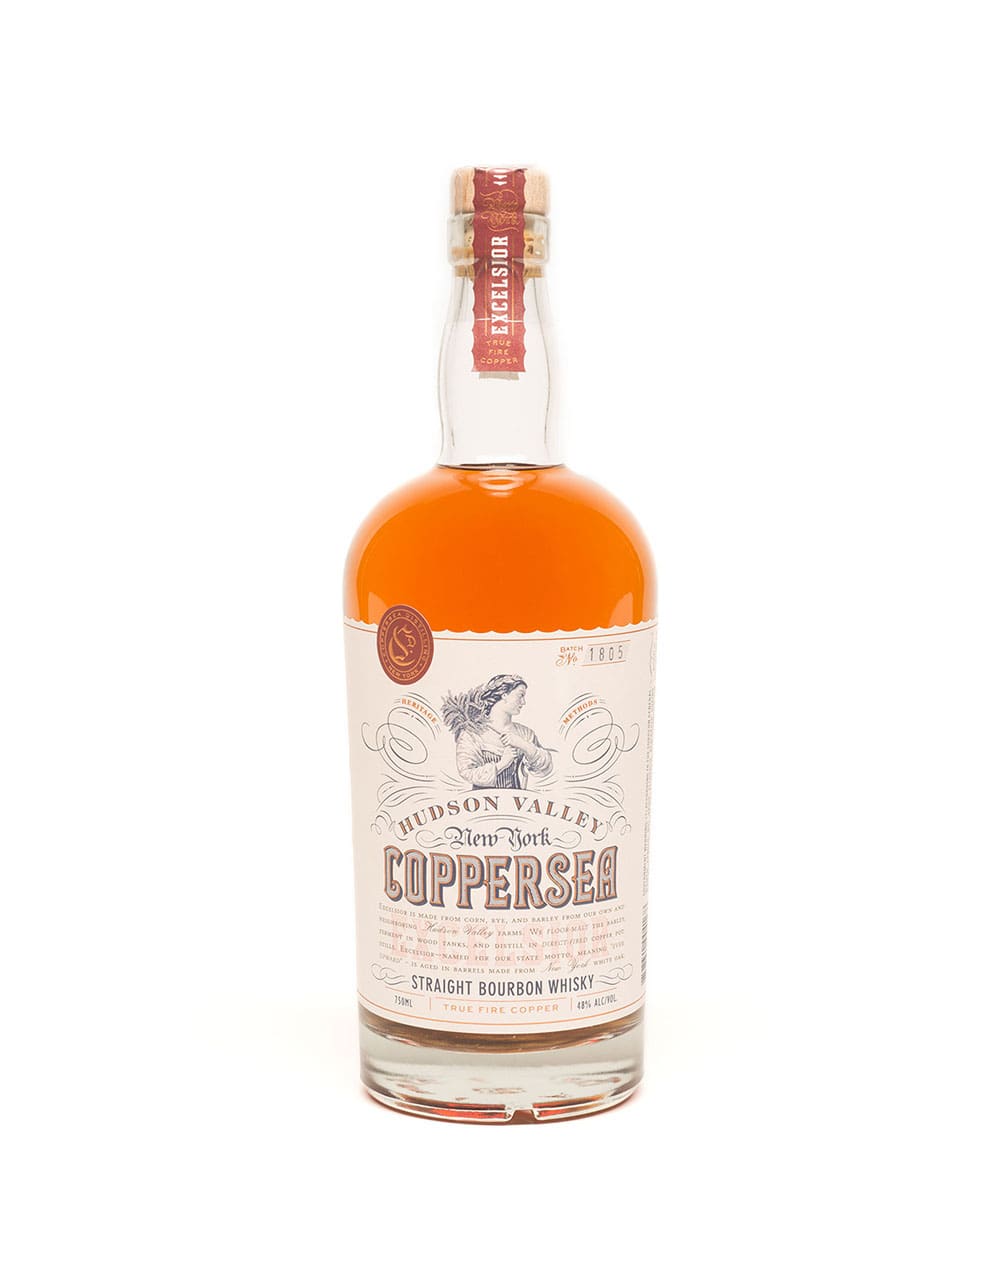 Coppersea Excelsior Bourbon Whisky